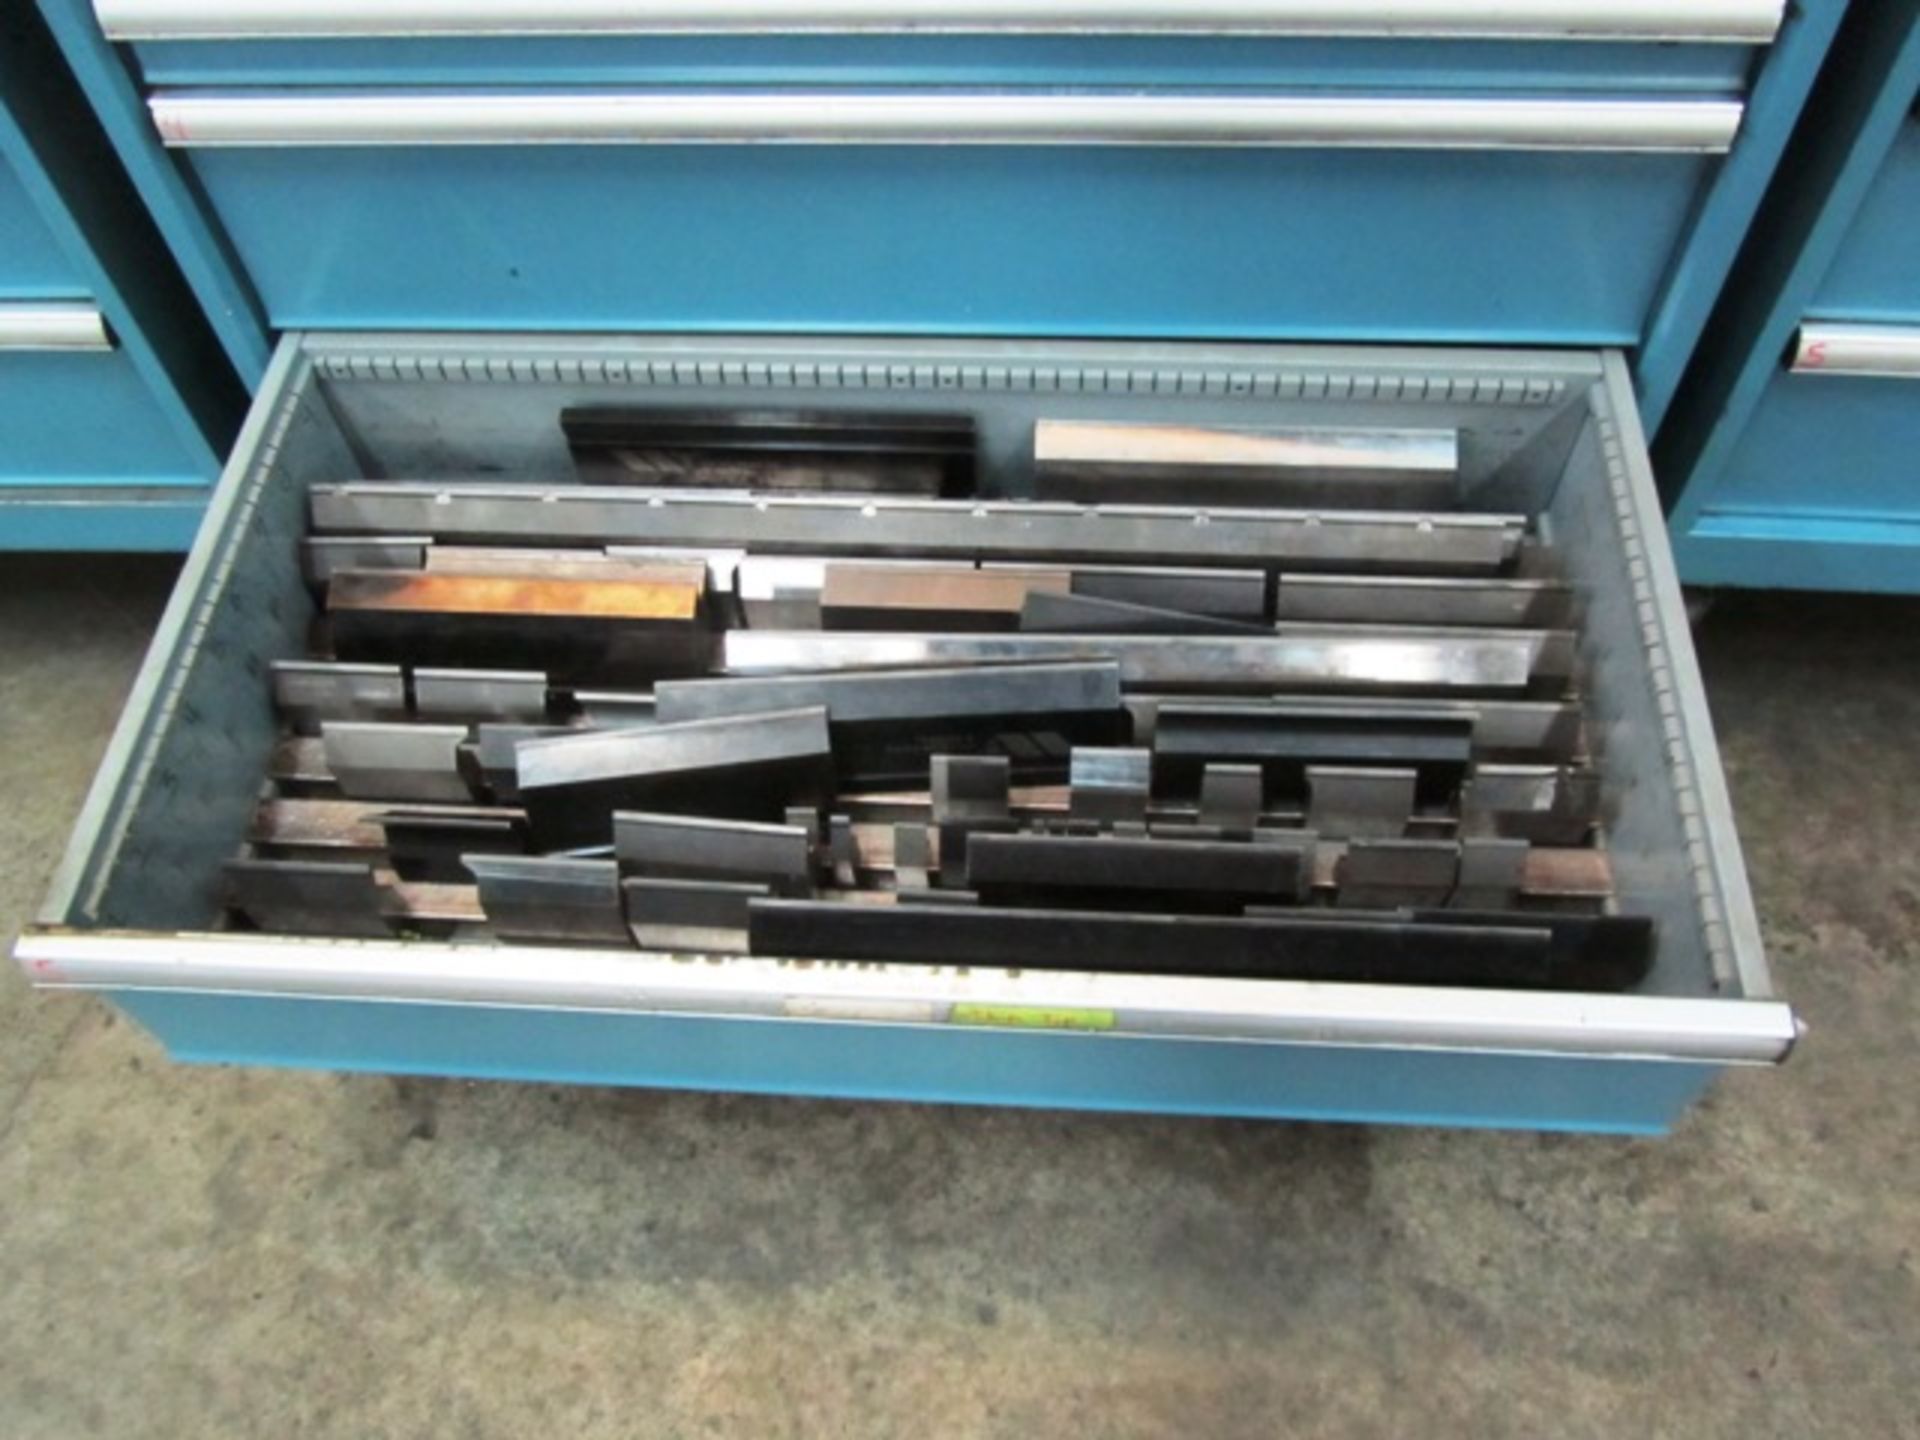 Wilson 5 Drawer Portable Tool Cabinet with Wilson Press Brake Dies - Image 6 of 6